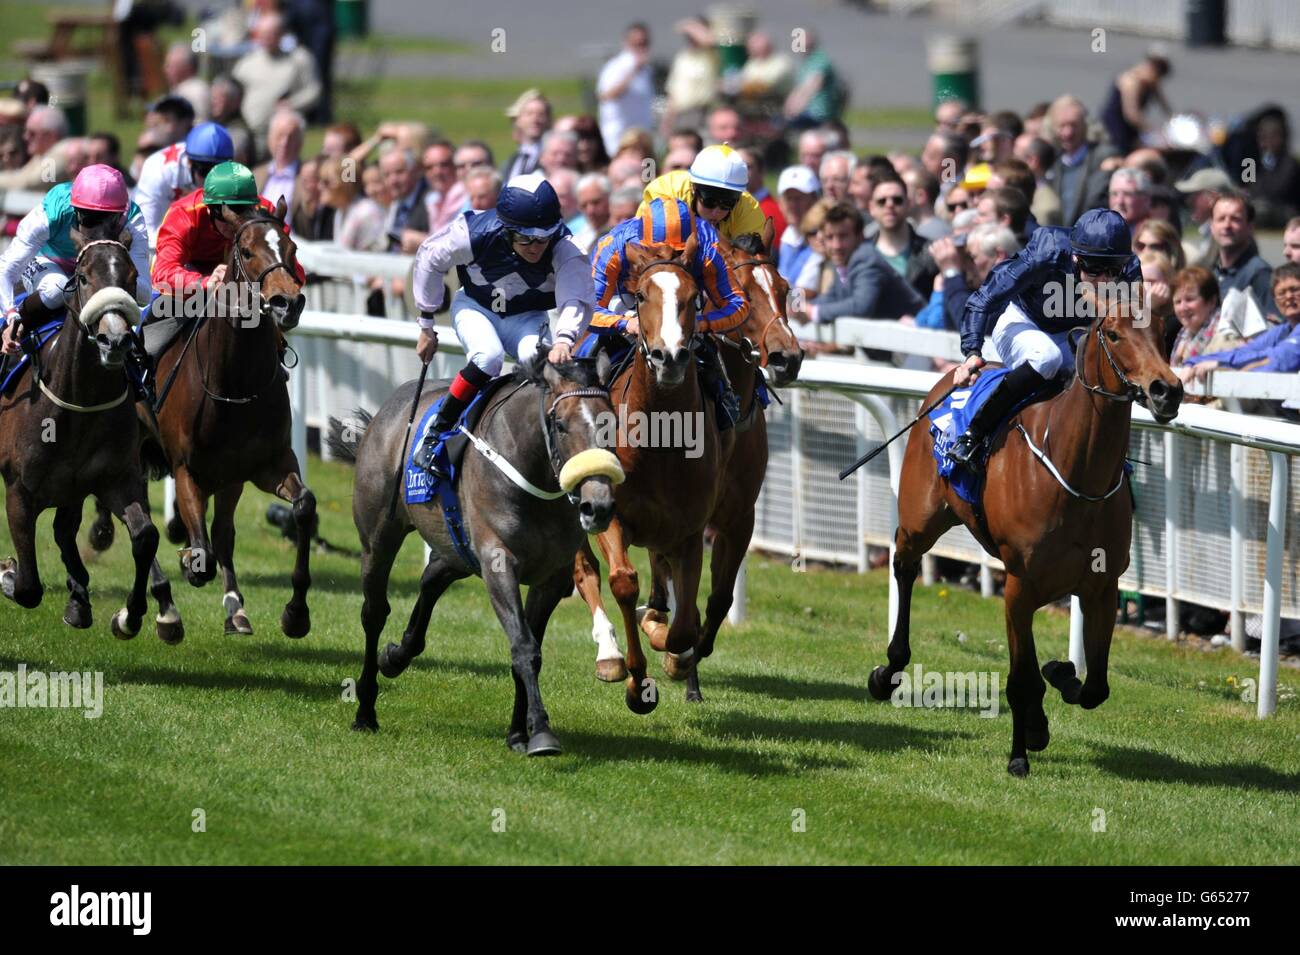 Glassatura ridden by Shane Foley (centre) goes on to win the the equisoftlive.com European Breeders Fund Fillies Maiden during the Tattersalls Irish 2000 Guineas Day at Curragh Racecourse, County Kildare. Stock Photo